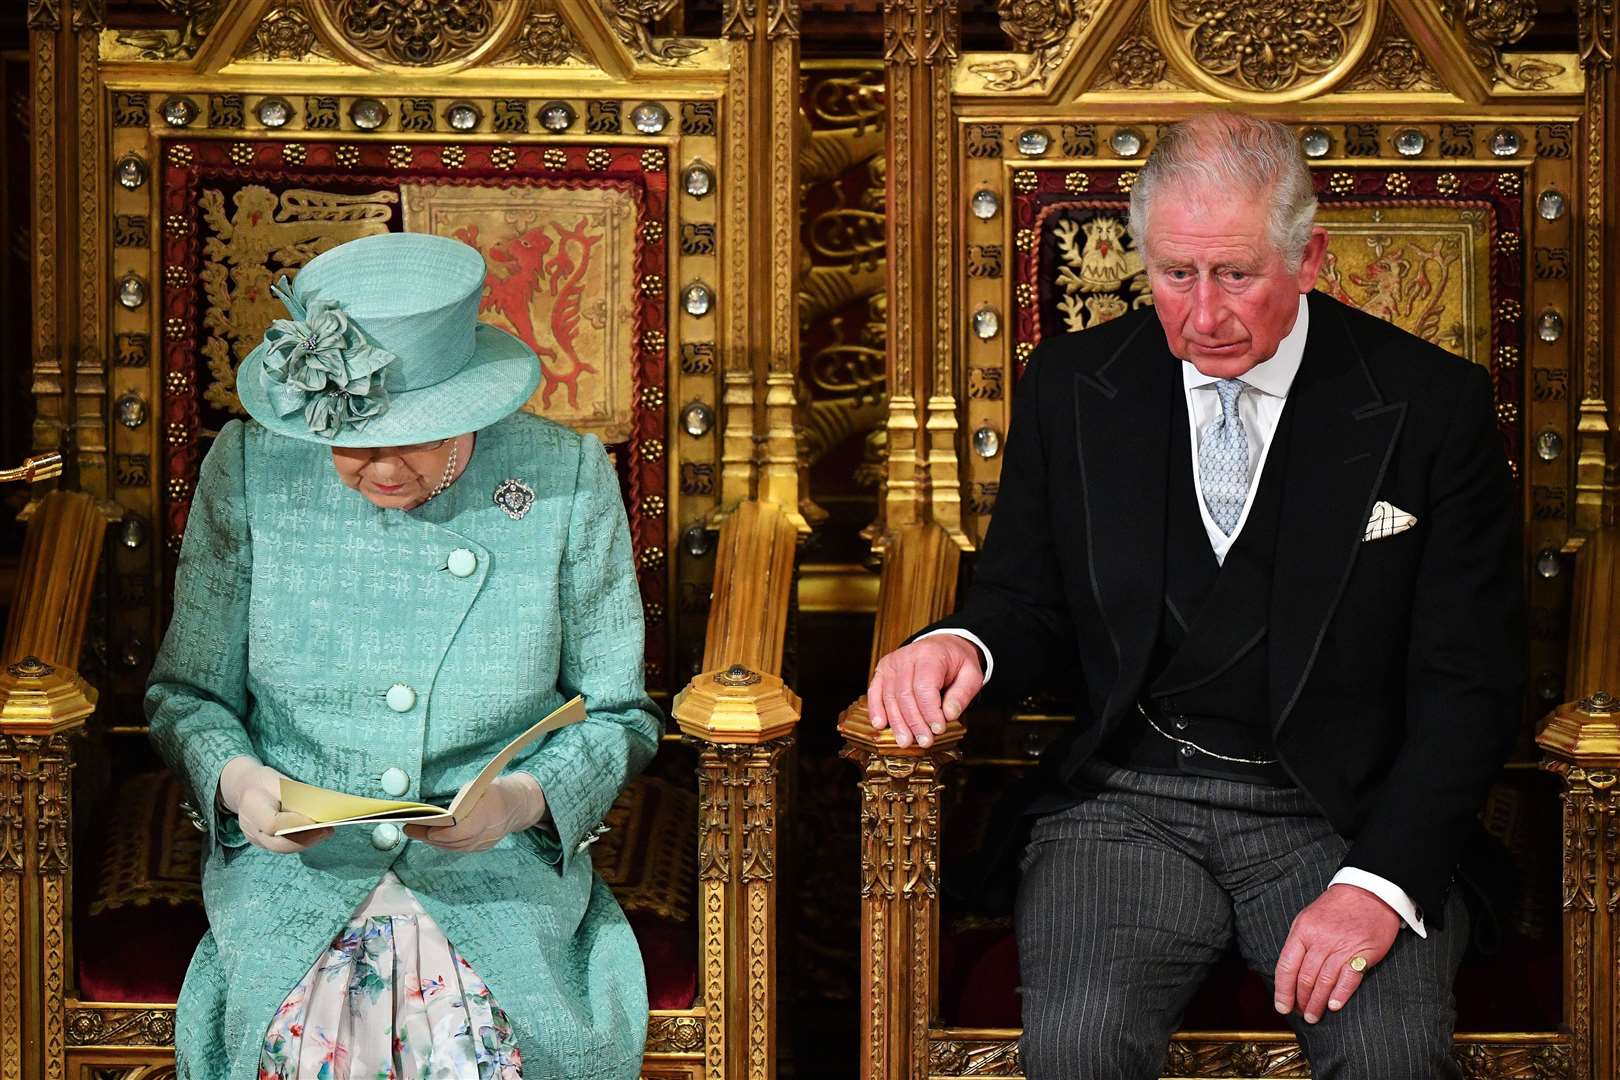 The Prince of Wales delivers the Queen’s speech during the state opening of Parliament in 2019 (Leon Neal/PA)